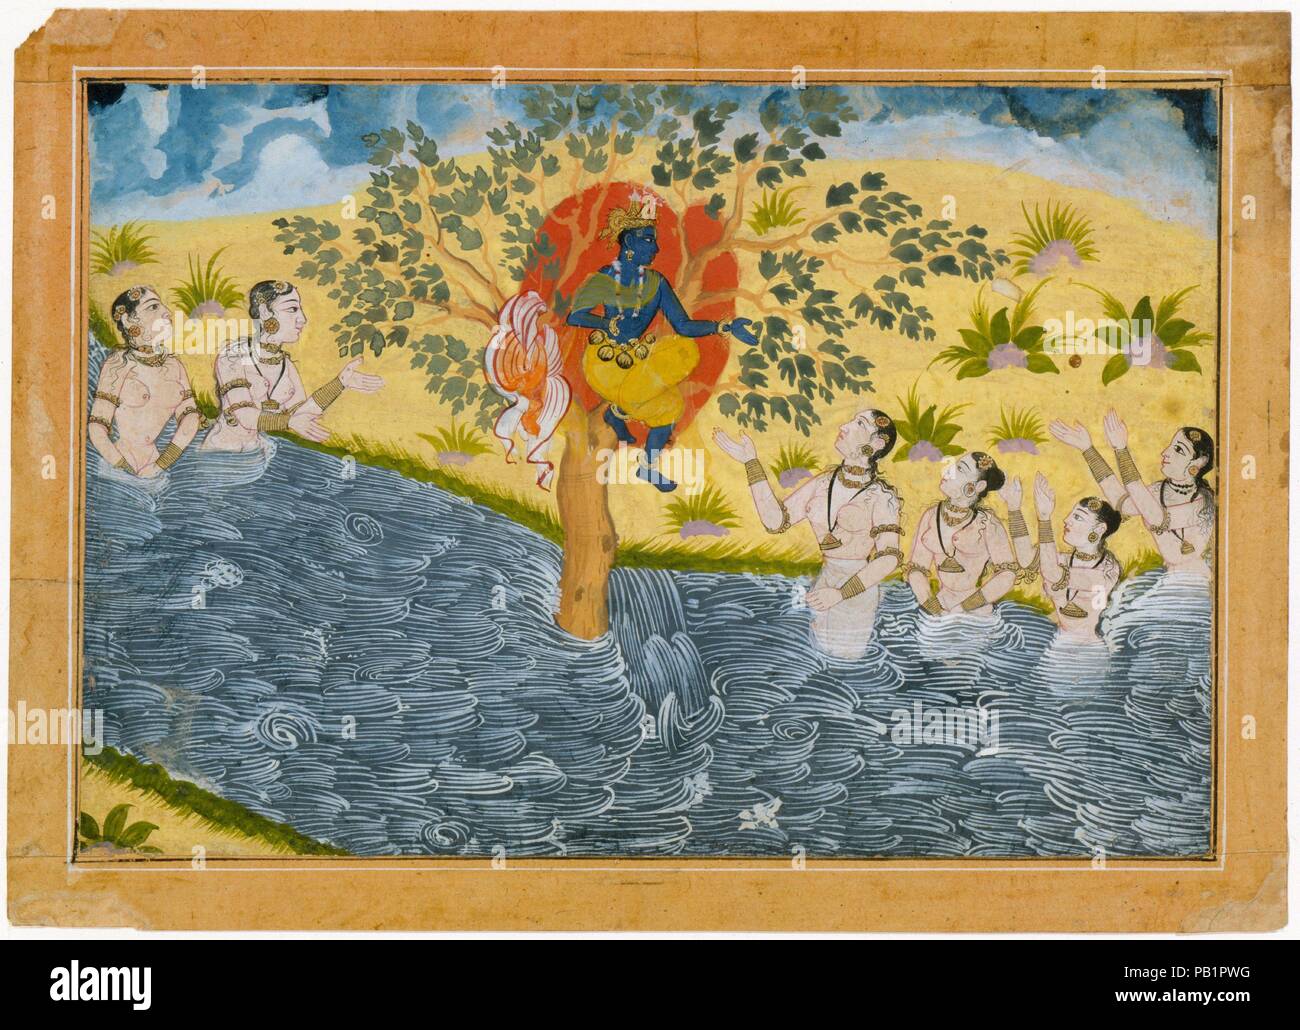 The Gopis Plead with Krishna to Return Their Clothing, Page from a Bhagavata Purana (Ancient Stories of Lord Vishnu) series. Culture: India (Rajasthan, Bikaner). Dimensions: Image: 6 3/4 × 9 3/4 in. (17.1 × 24.8 cm)  Sheet: 7 15/16 × 11 1/16 in. (20.2 × 28.1 cm). Date: ca. 1610.  Krishna sits high in a tree with the clothing he has playfully stolen from the bathing gopis (cow maids). They look on with love, praying for union with the god in a passionate expression of bhakti (devotional worship). The artist has employed a limited Rajput color scheme in conjunction with elements of Mughal deriva Stock Photo